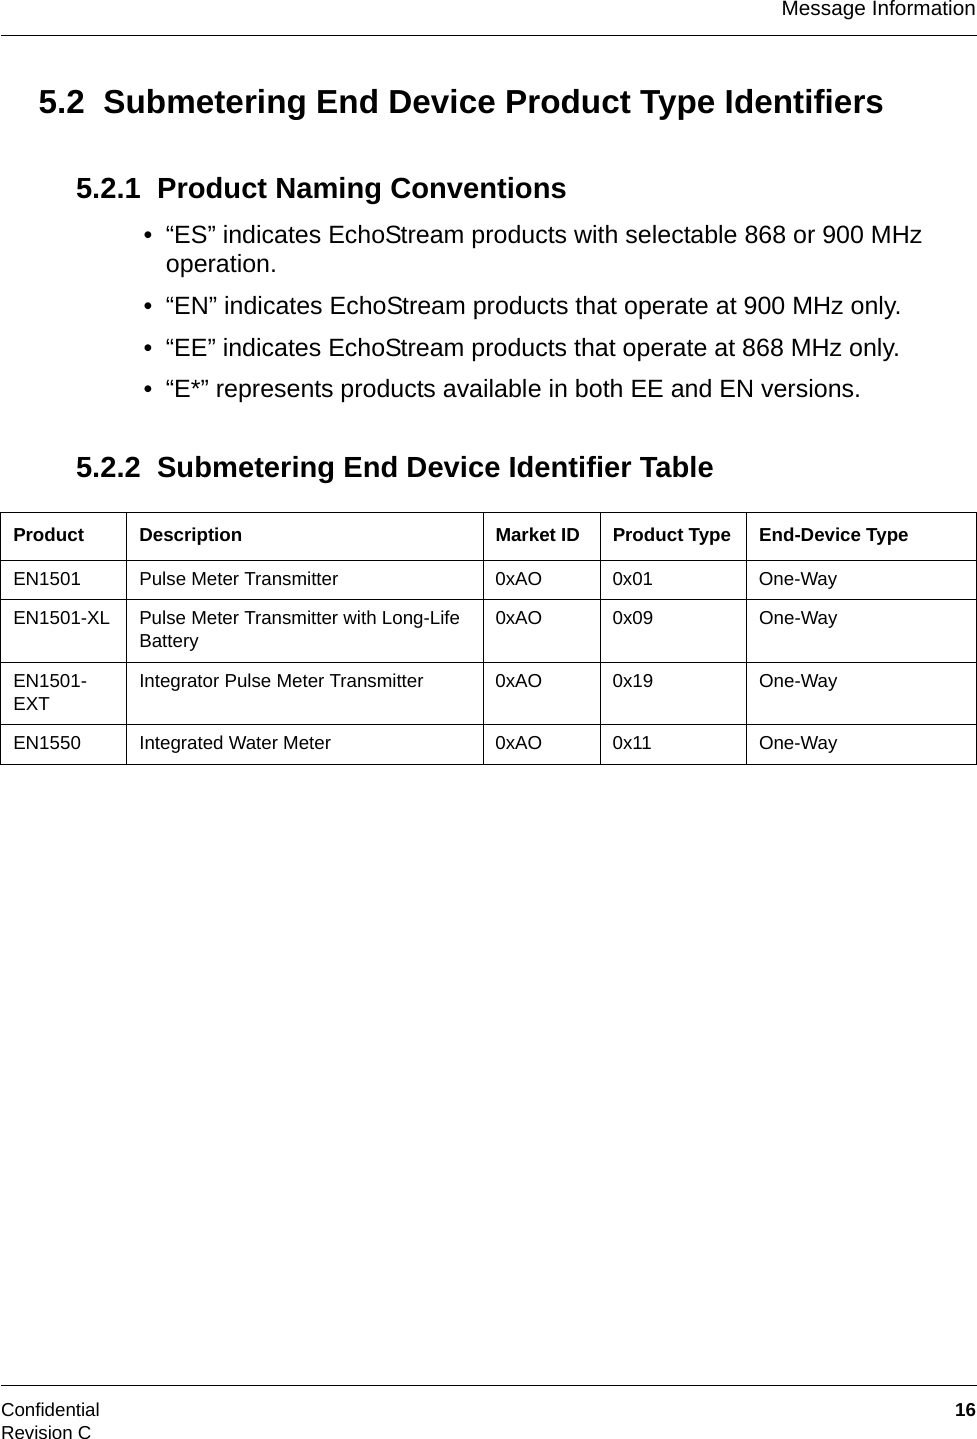 Message InformationConfidential  16Revision C5.2  Submetering End Device Product Type Identifiers5.2.1  Product Naming Conventions• “ES” indicates EchoStream products with selectable 868 or 900 MHz operation. • “EN” indicates EchoStream products that operate at 900 MHz only. • “EE” indicates EchoStream products that operate at 868 MHz only. • “E*” represents products available in both EE and EN versions.5.2.2  Submetering End Device Identifier TableProduct Description Market ID Product Type End-Device Type EN1501 Pulse Meter Transmitter 0xAO 0x01 One-WayEN1501-XL Pulse Meter Transmitter with Long-Life Battery 0xAO 0x09 One-WayEN1501-EXT Integrator Pulse Meter Transmitter 0xAO 0x19 One-WayEN1550 Integrated Water Meter 0xAO 0x11 One-Way